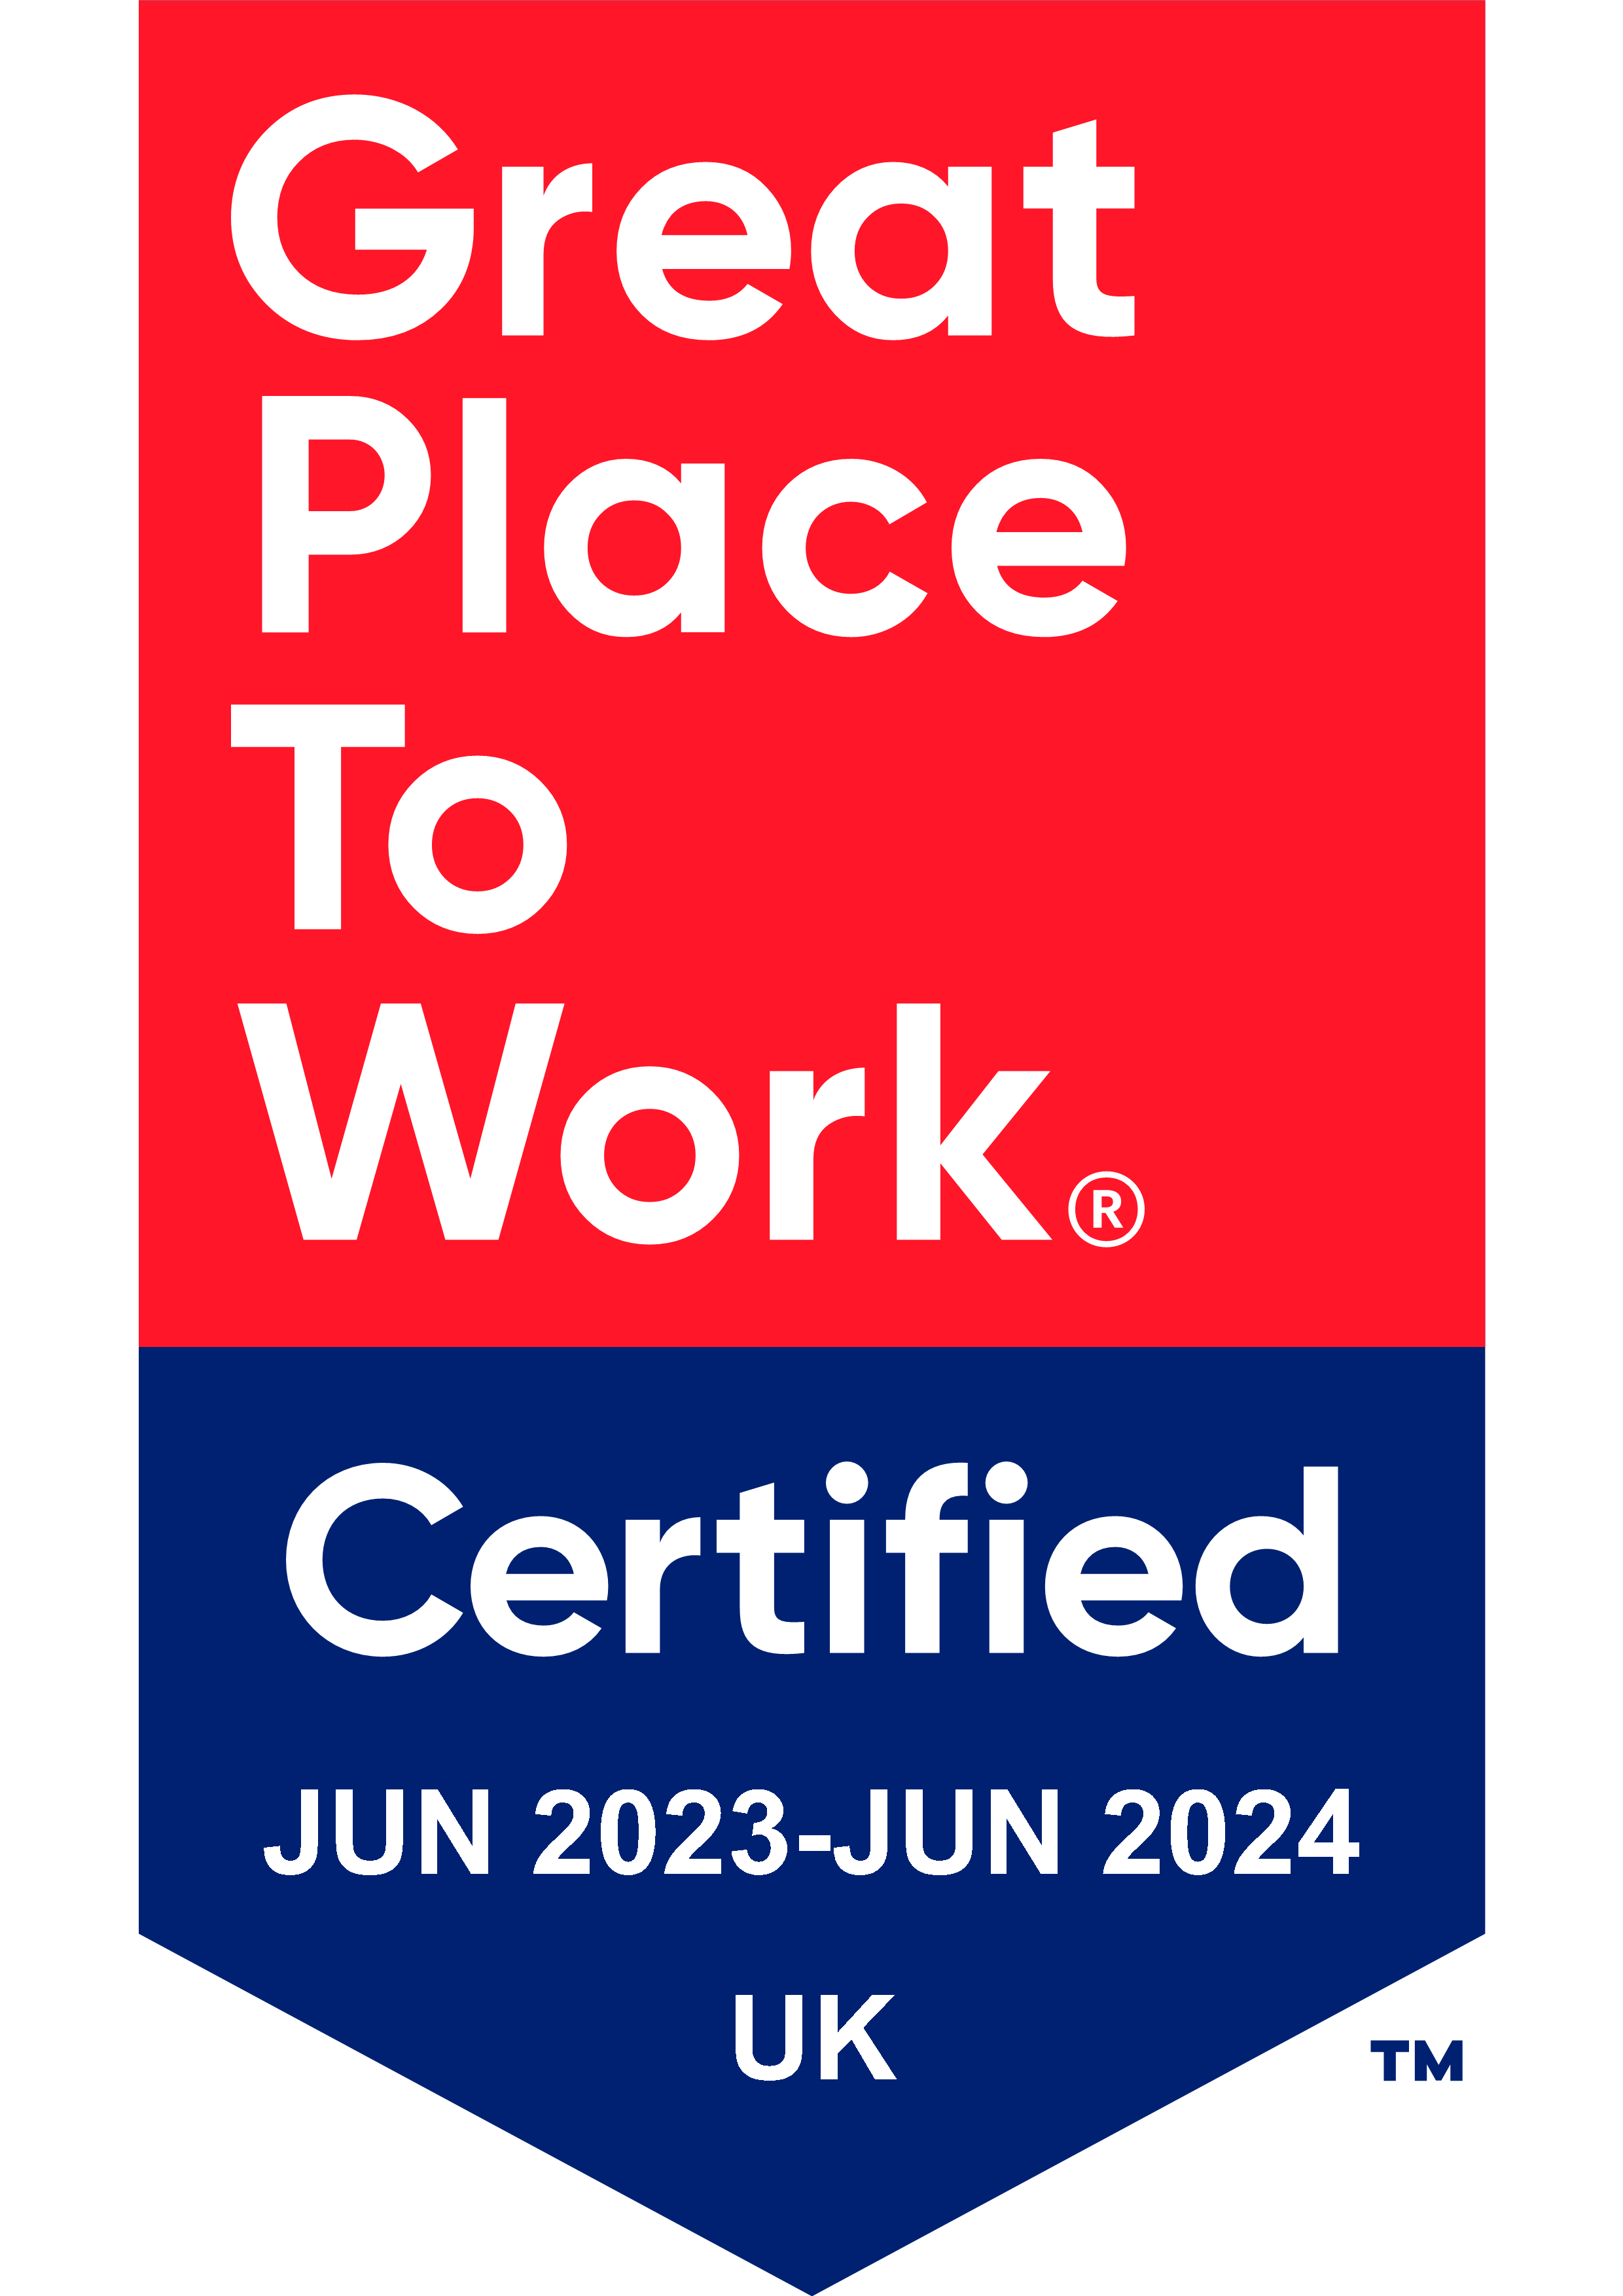 Great place to work - Certified May 2022 to May 2023 - UK